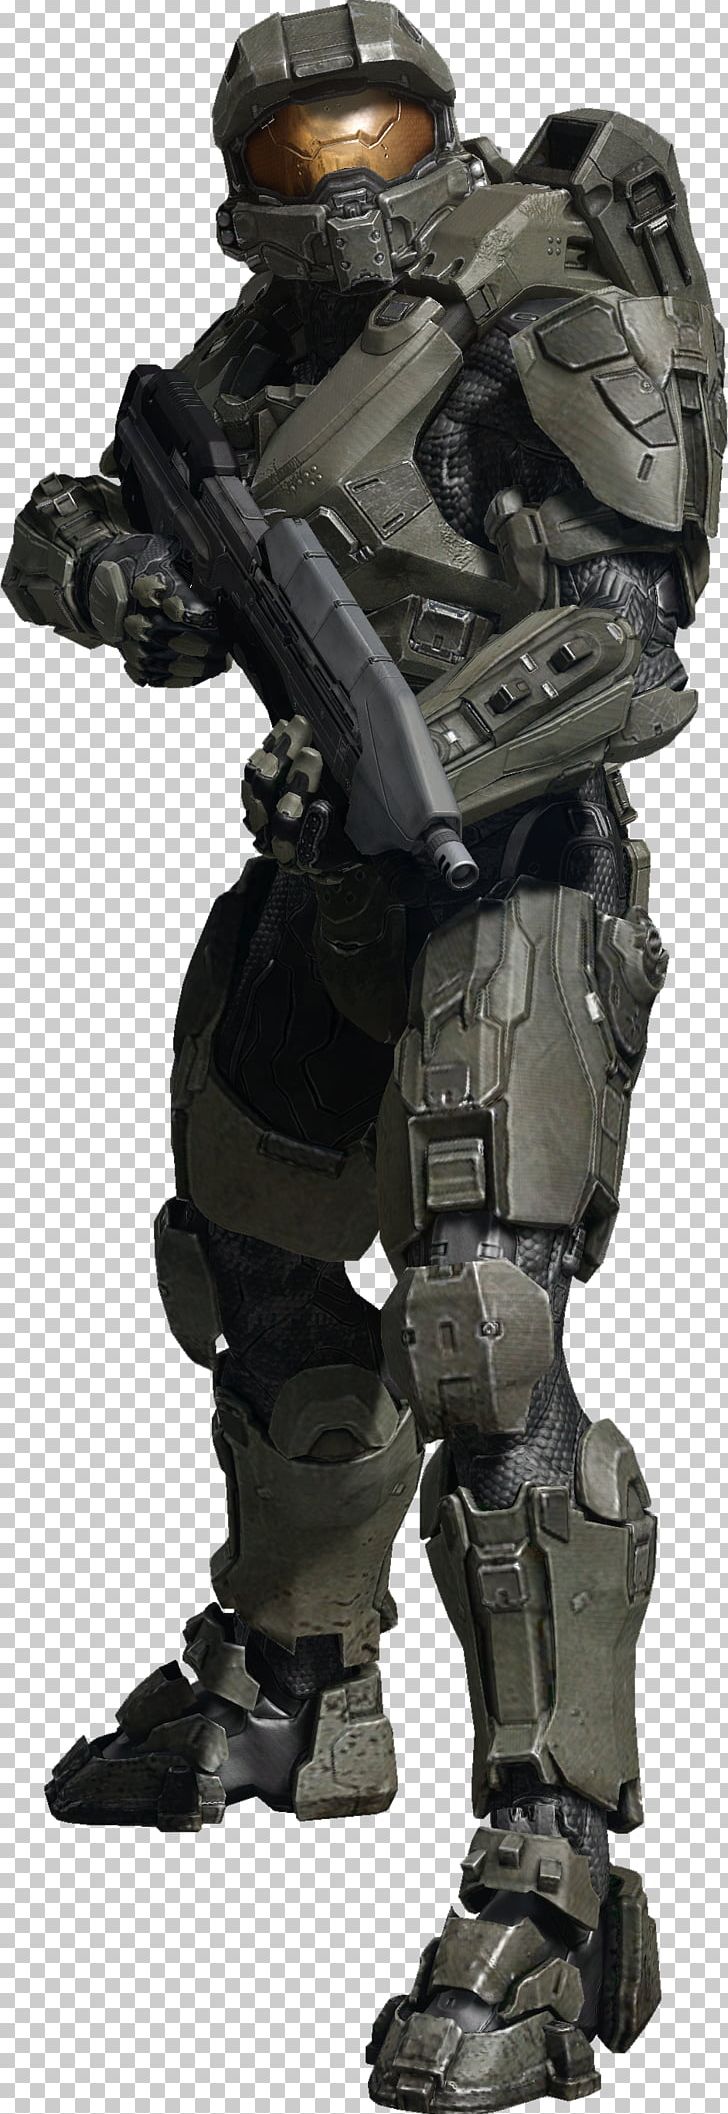 Halo 4 Halo: Combat Evolved Halo 5: Guardians Halo 3 Halo: Reach PNG, Clipart, Action Figure, Armour, Character, Factions Of Halo, Figurine Free PNG Download